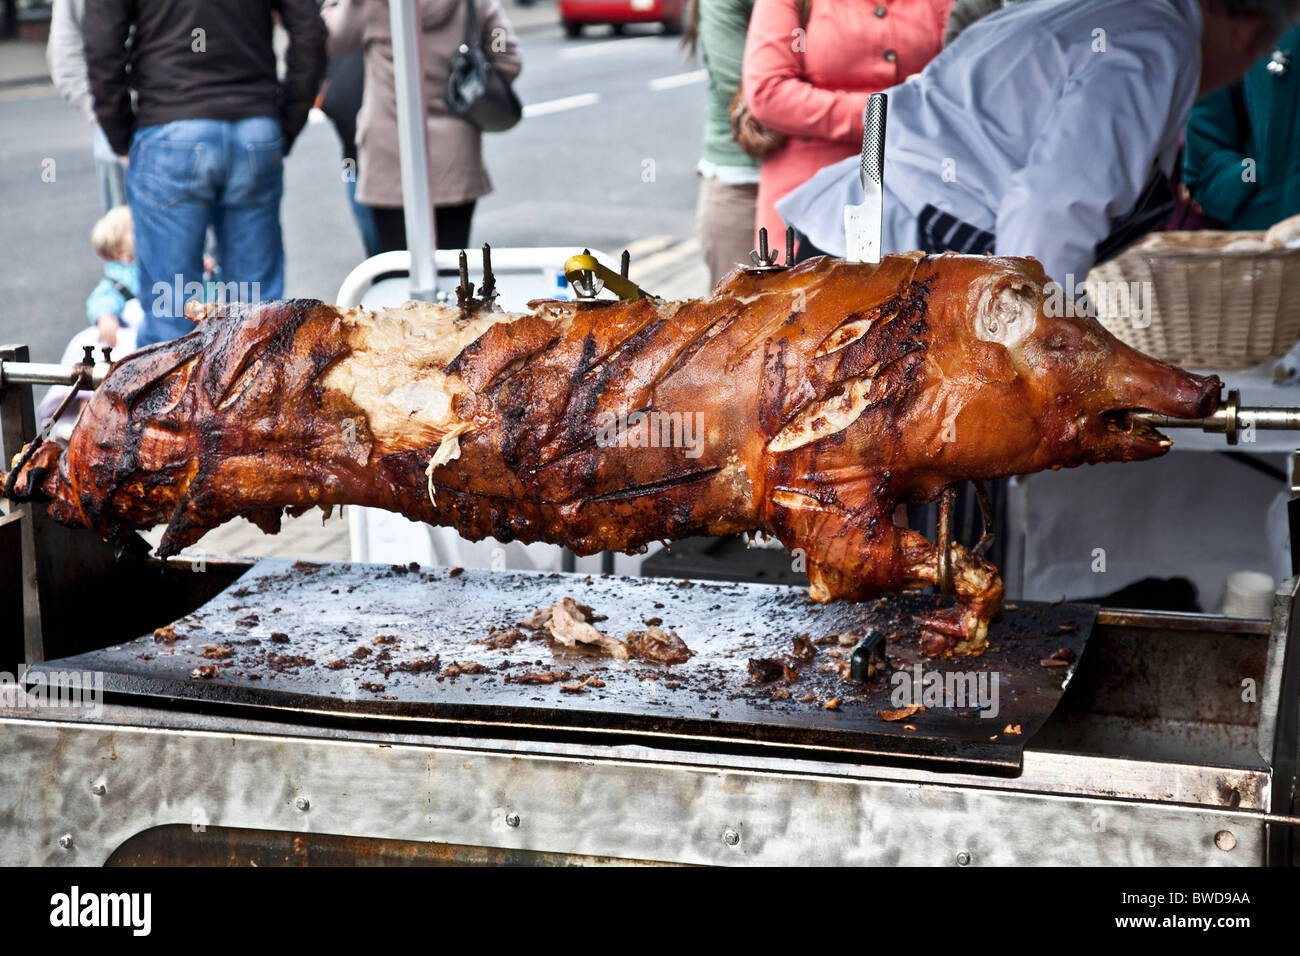 A hog roast in the street as part of the Wintertainment festival in Troon, East Ayrshire, Scotland Stock Photo